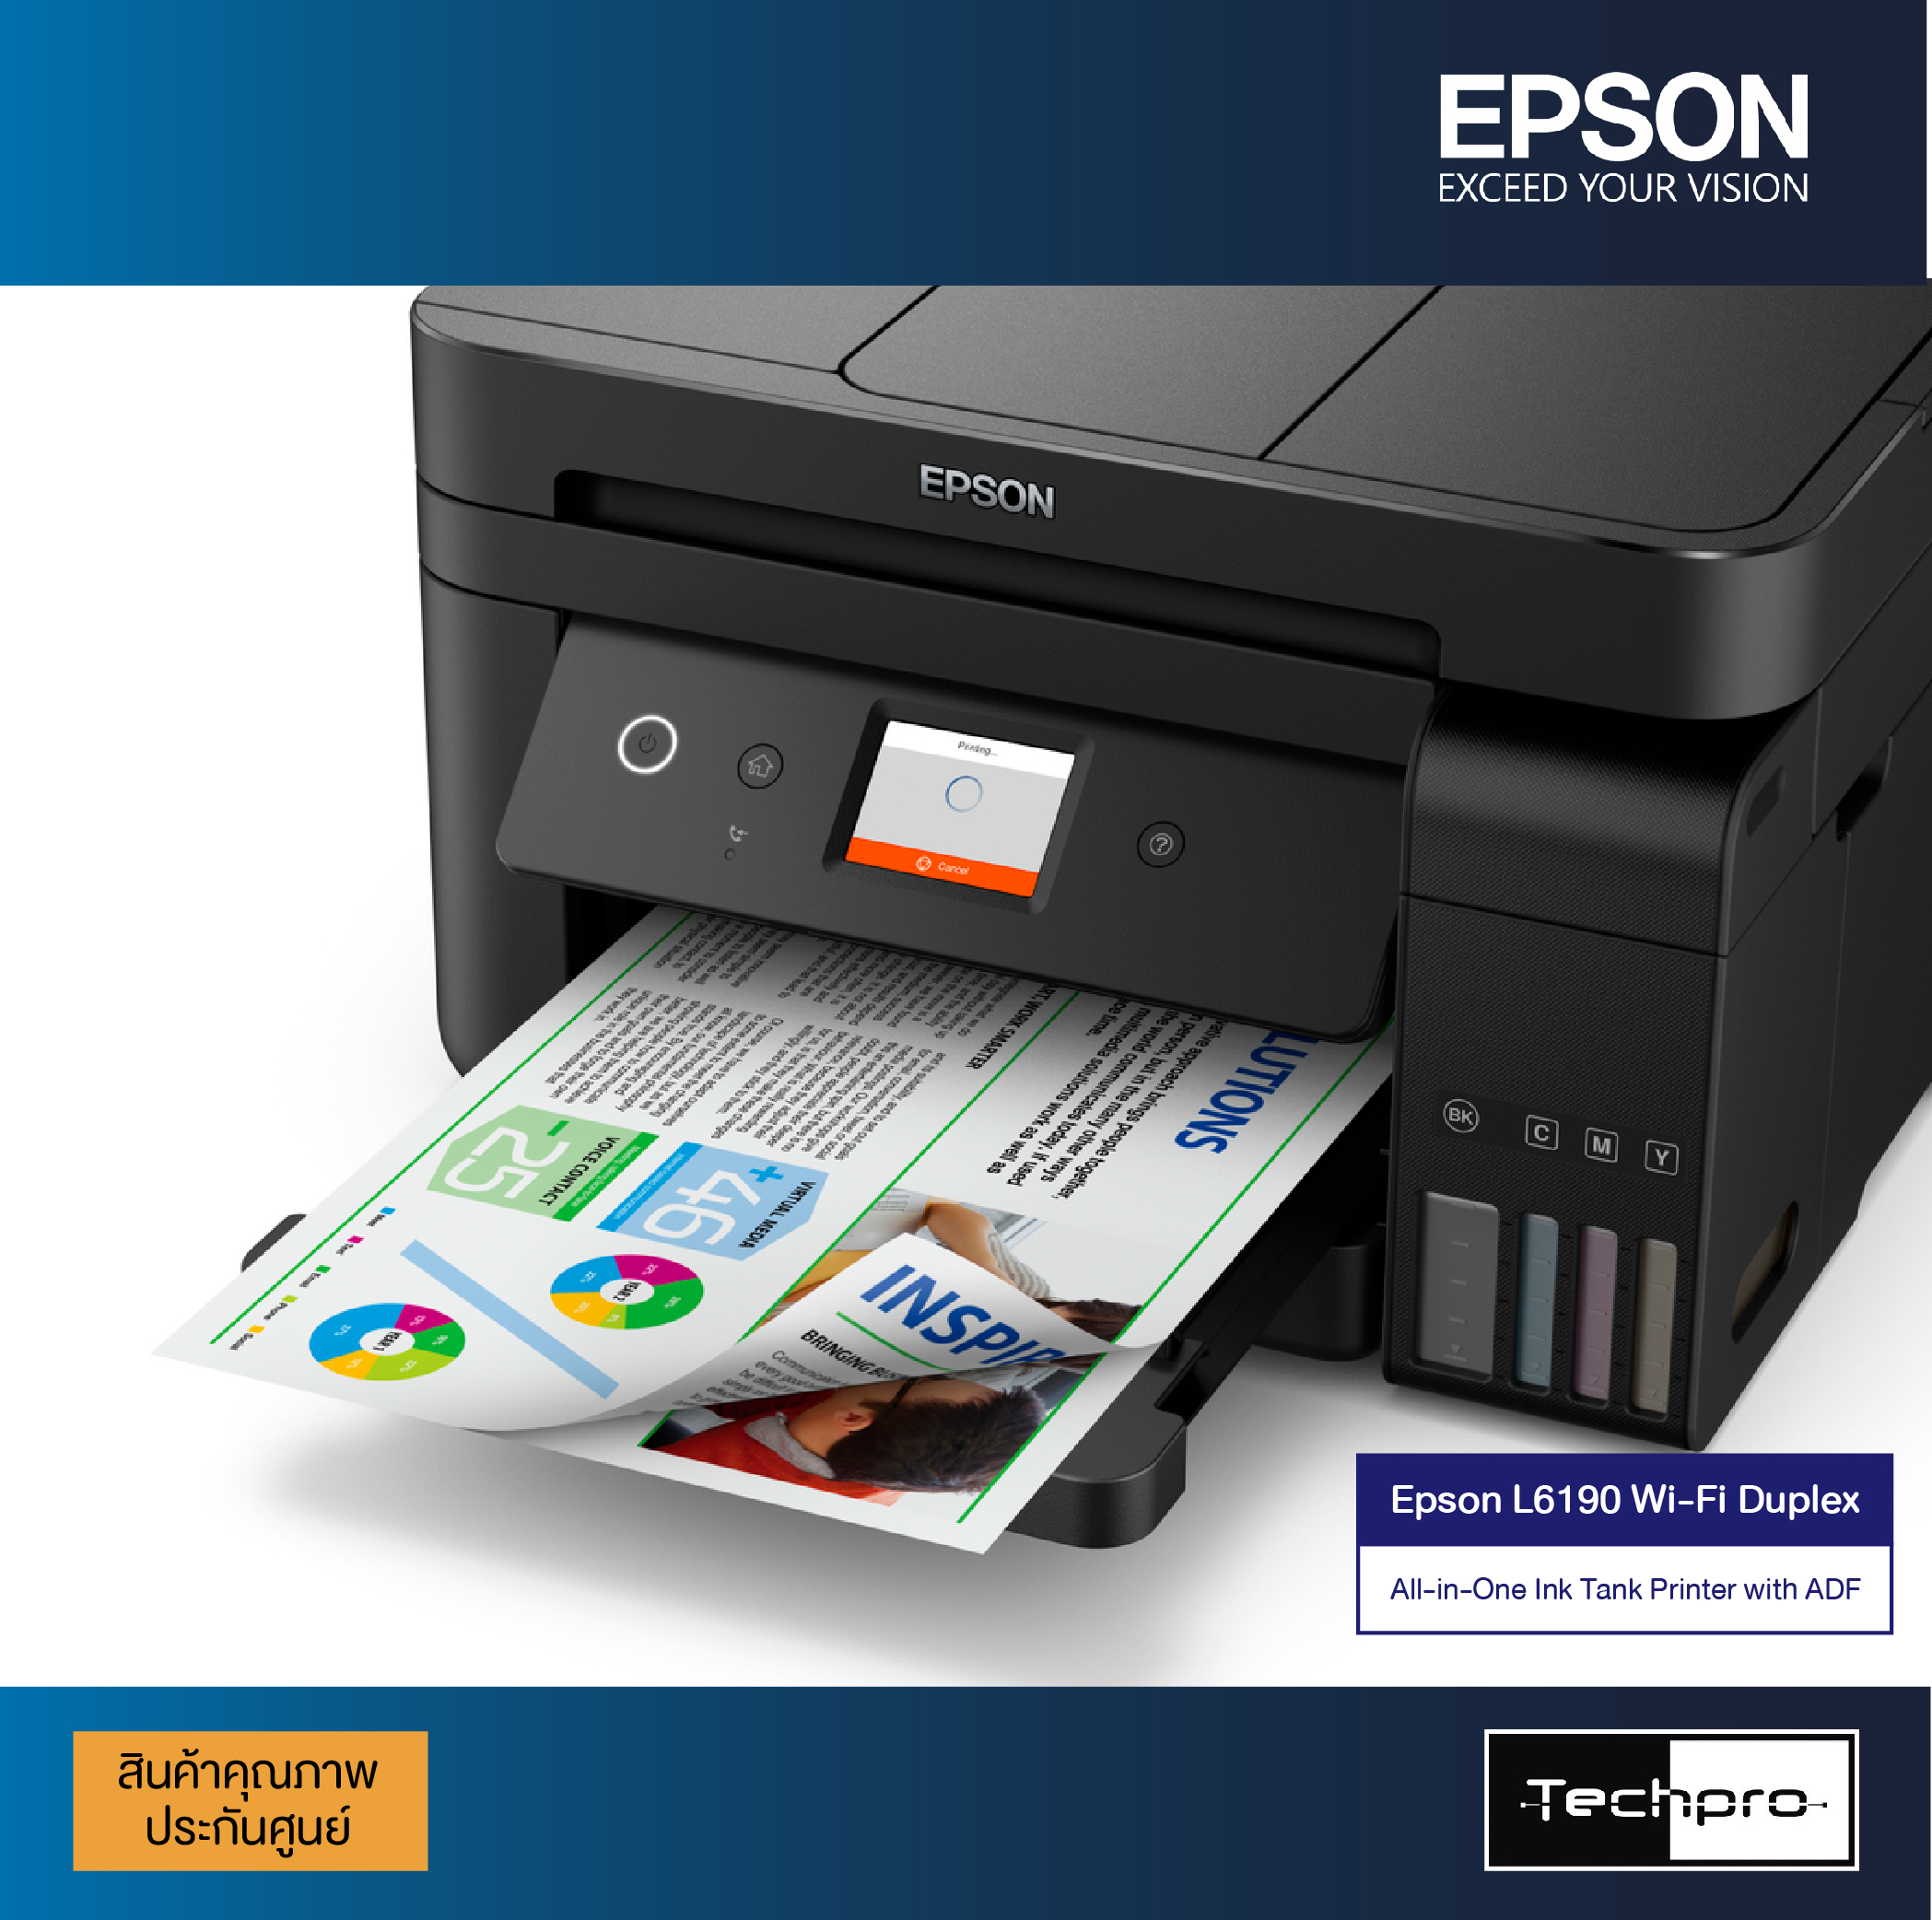 Epson L6190 Wi Fi Duplex All In One Ink Tank Printer With Adf Techpro 2107